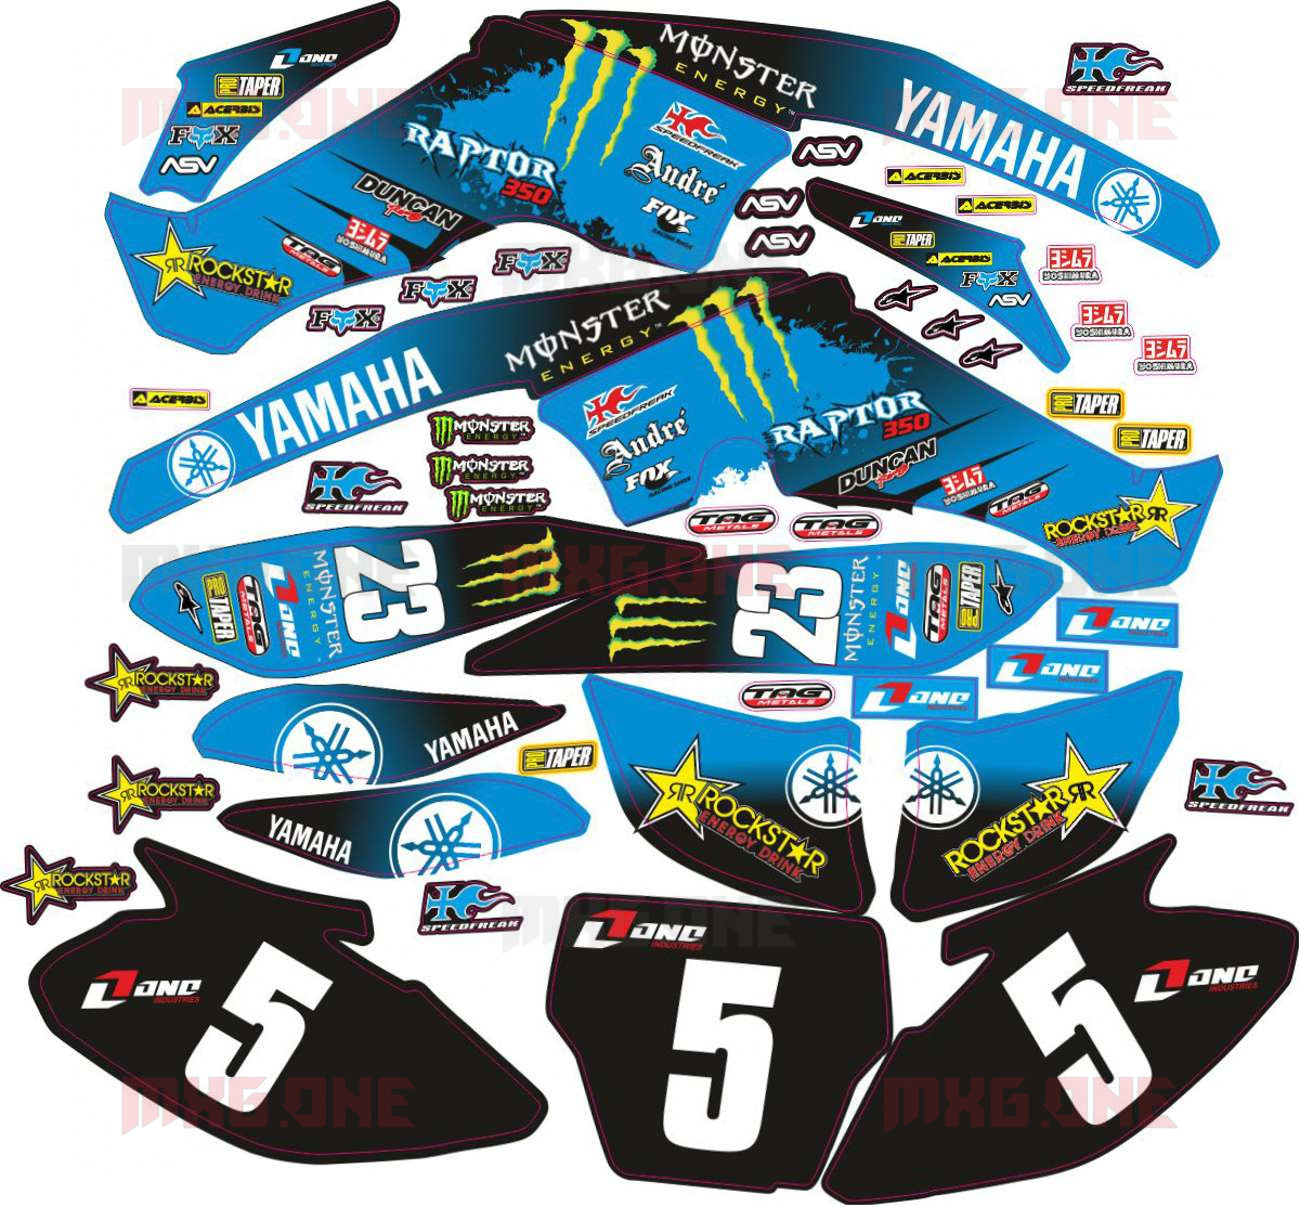 Graphics Kits Decals Stickers Flame Blue  4 YAMAHA RAPTOR 350 2004-2014